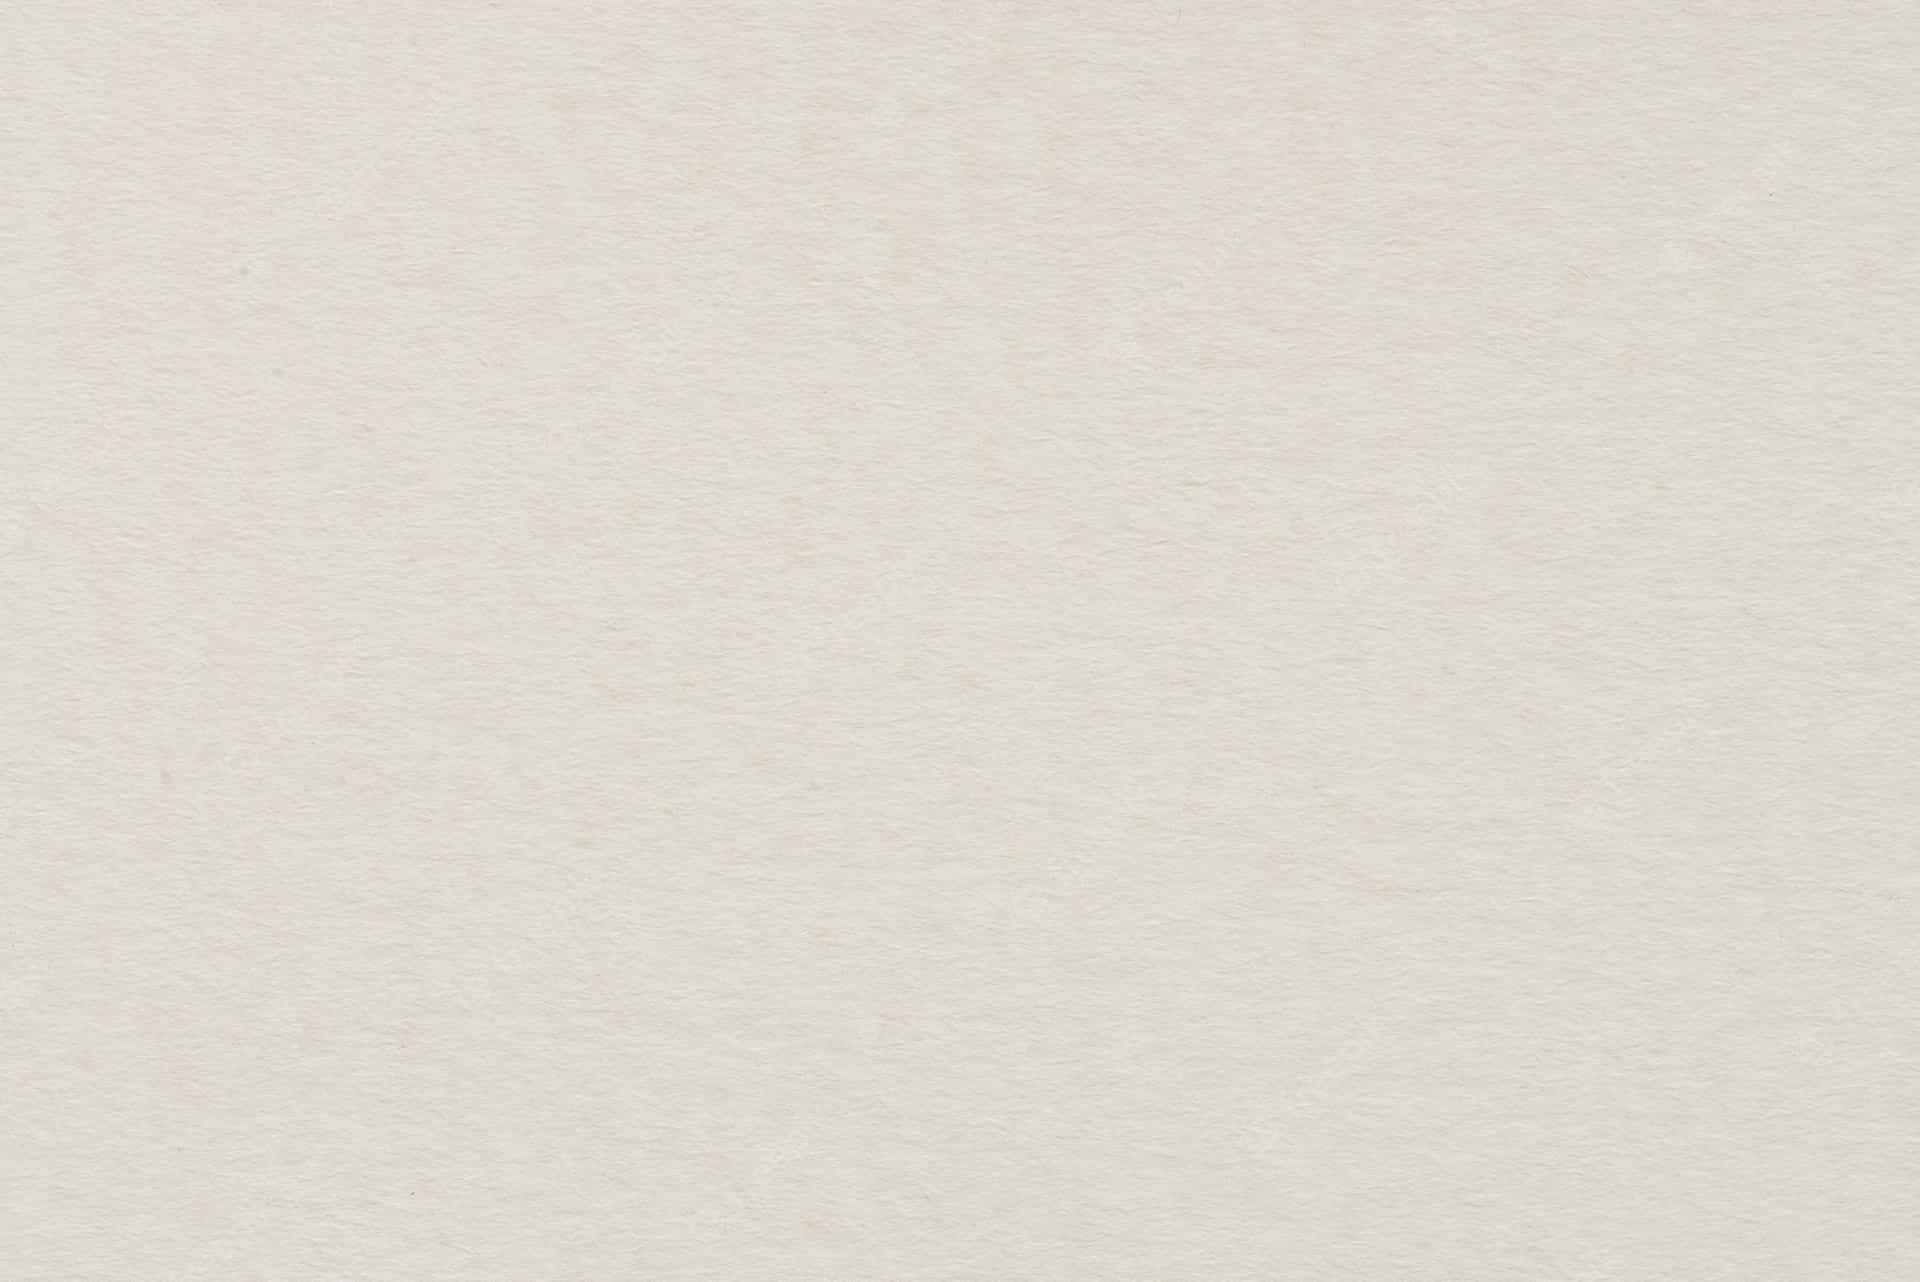 Clean and Elegant Off-White Paper Background Wallpaper